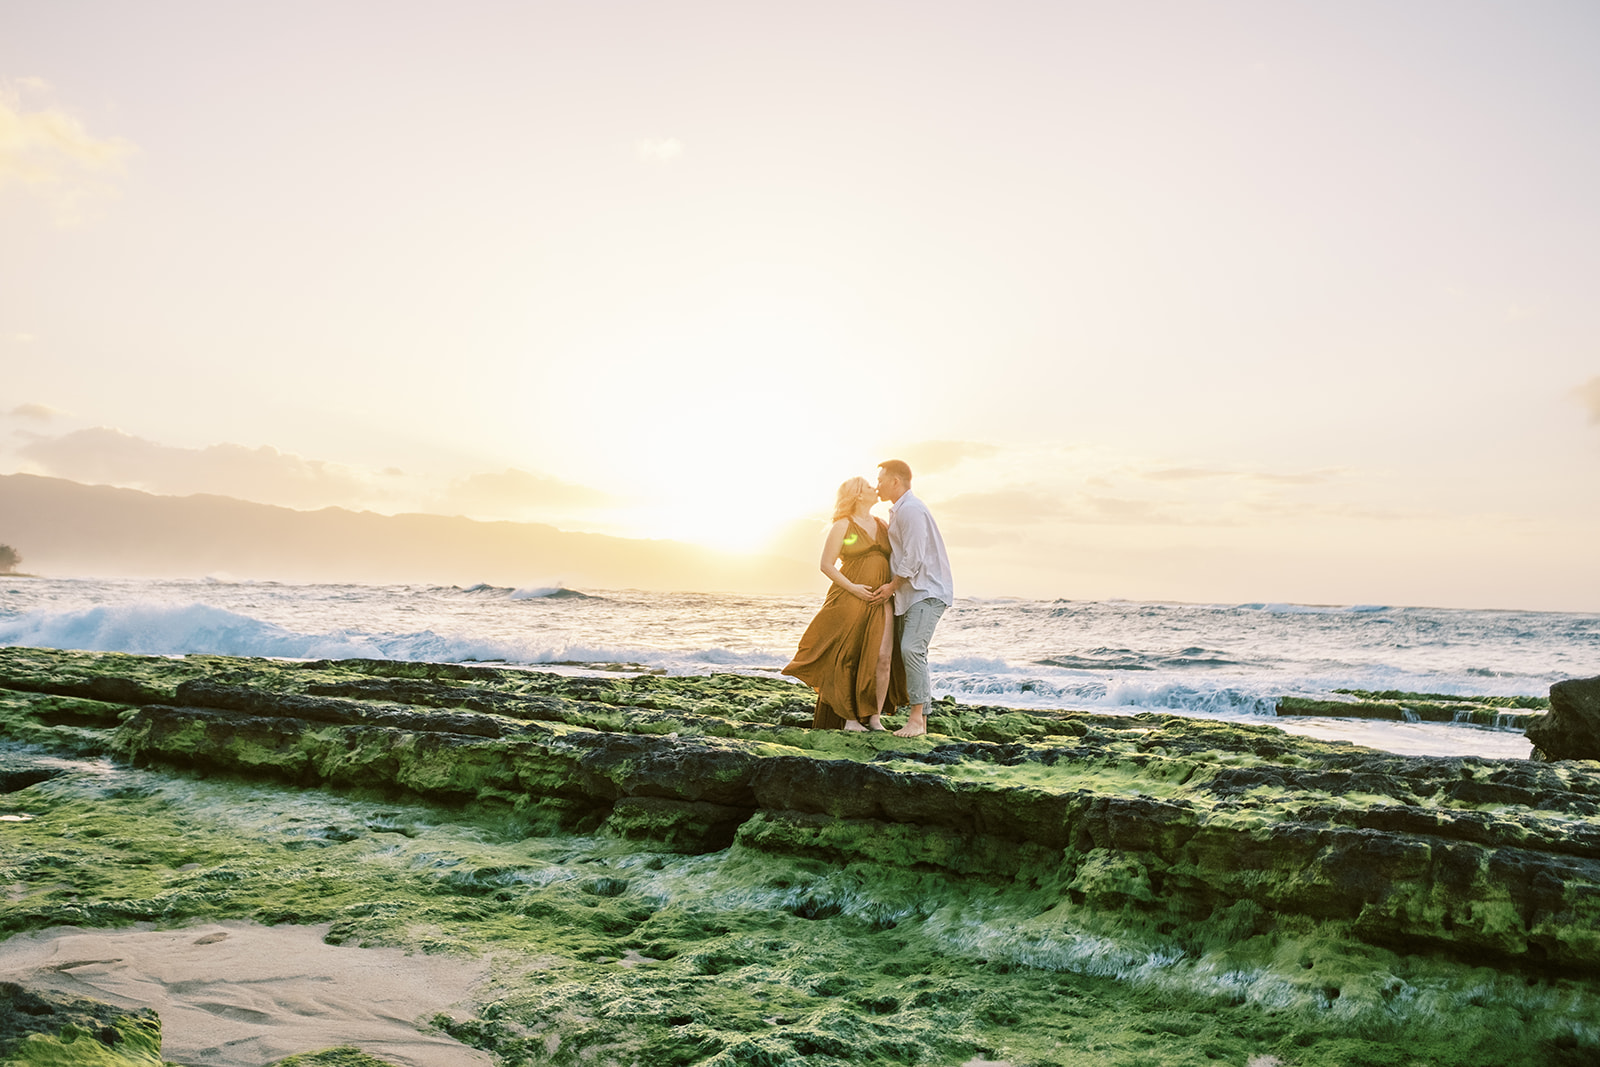 Couple sharing a romantic moment on a rocky beach at sunset on Oahu captured by Megan Moura